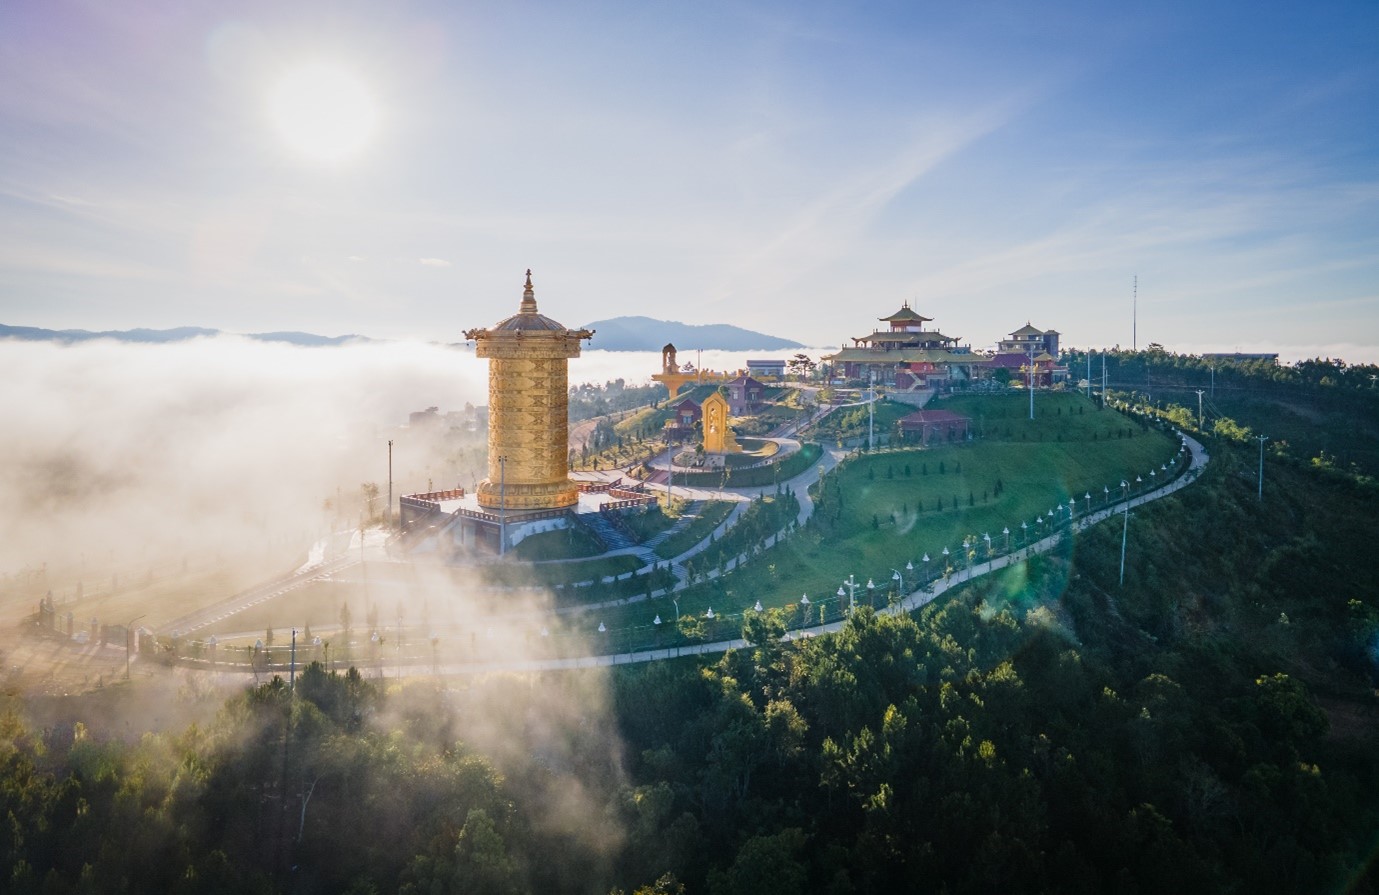 The Largest Prayer Wheel In Guinness World Records Amazed Thousands Of Visitors In Dalat, Vietnam